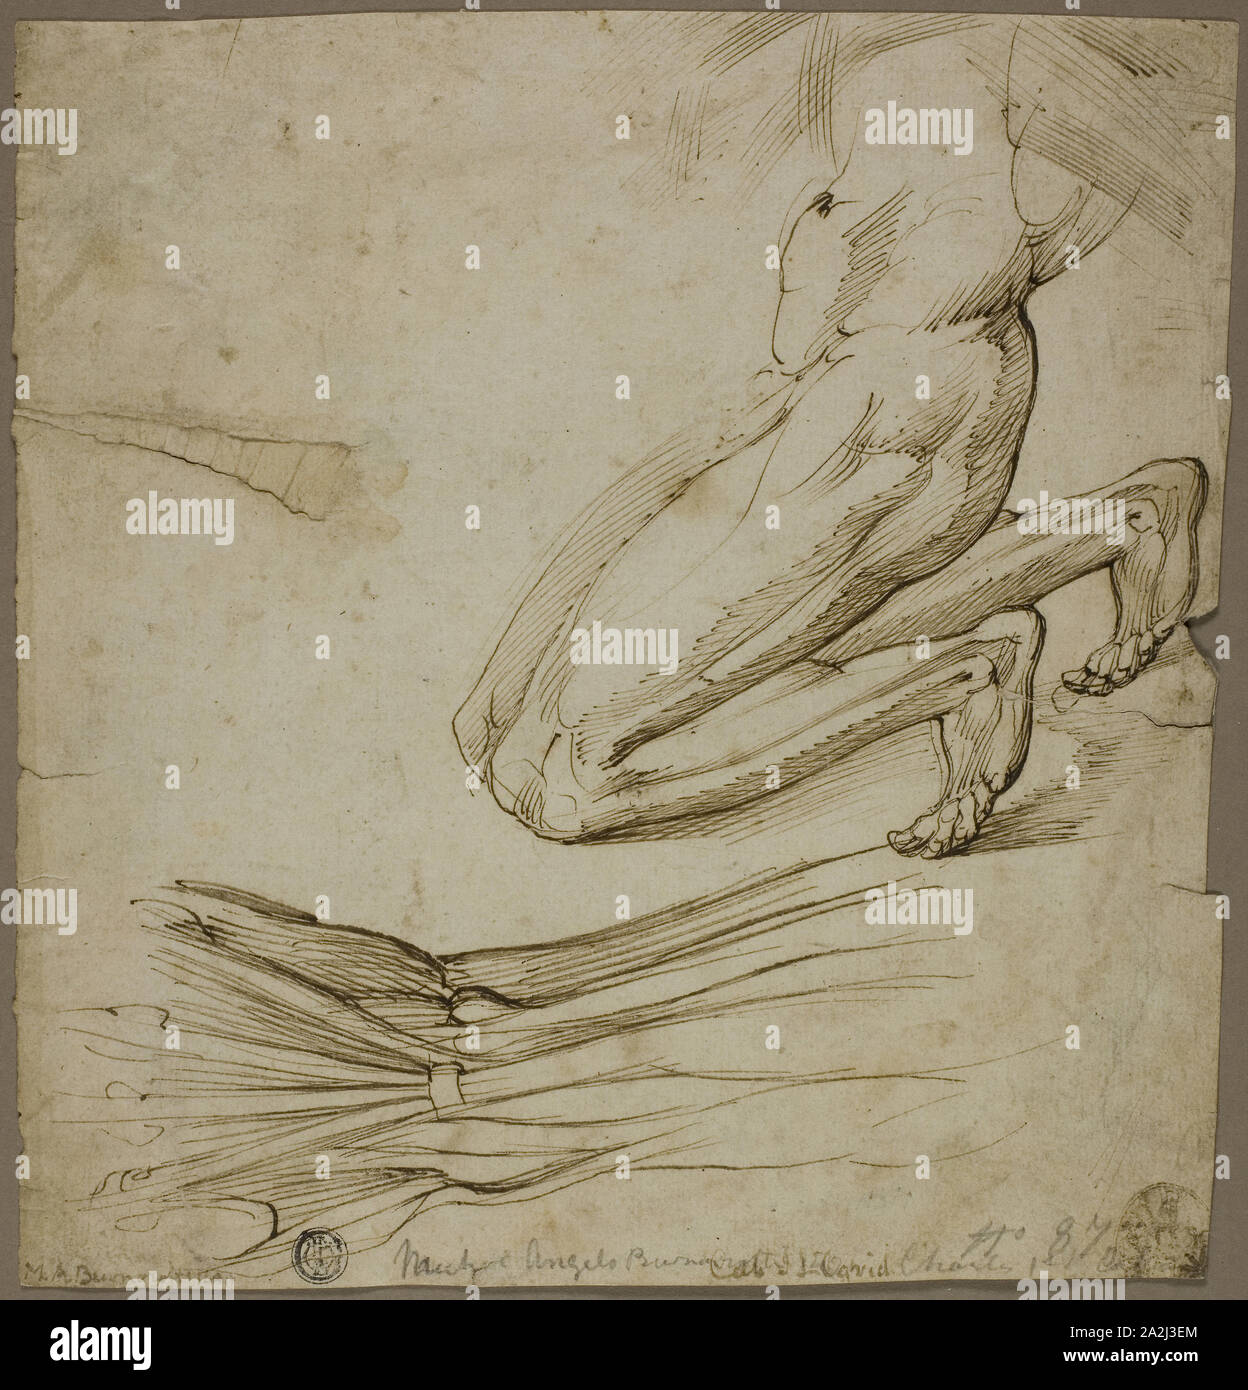 Anatomical Study and Sketch of Kneeling Figure, n.d., Follower of Michelangelo Buonarroti, Italian, 1475-1564, Italy, Pen and brown ink on ivory laid paper, 228 x 219 mm (max Stock Photo